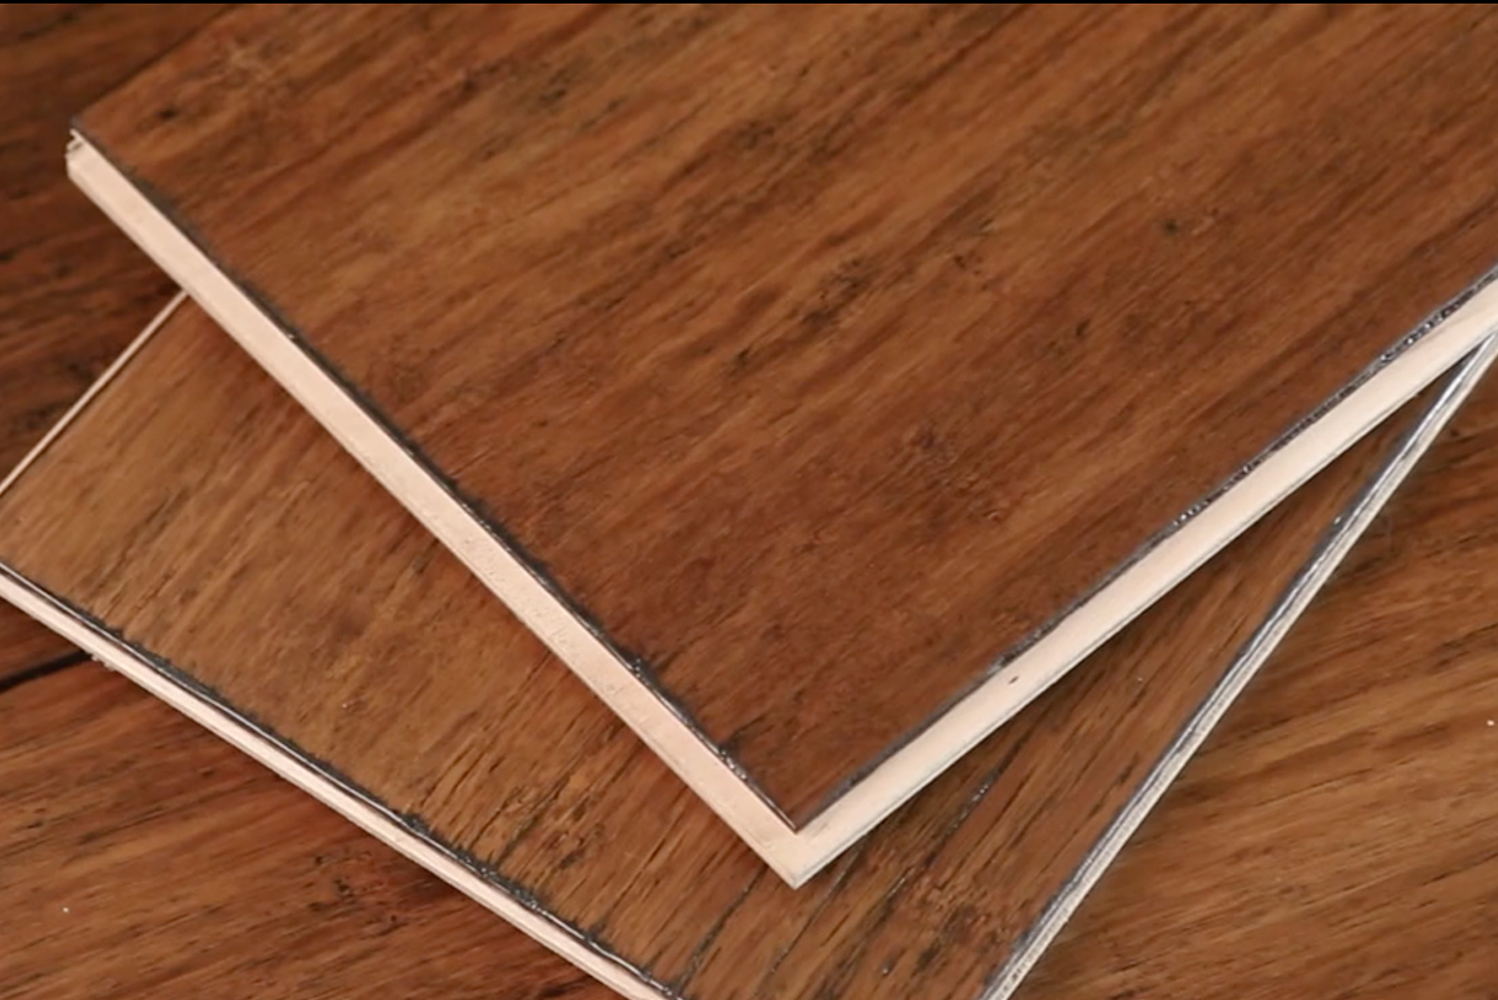 Cali Bamboo added nine new floors to its Eco-Engineered bamboo flooring collection 